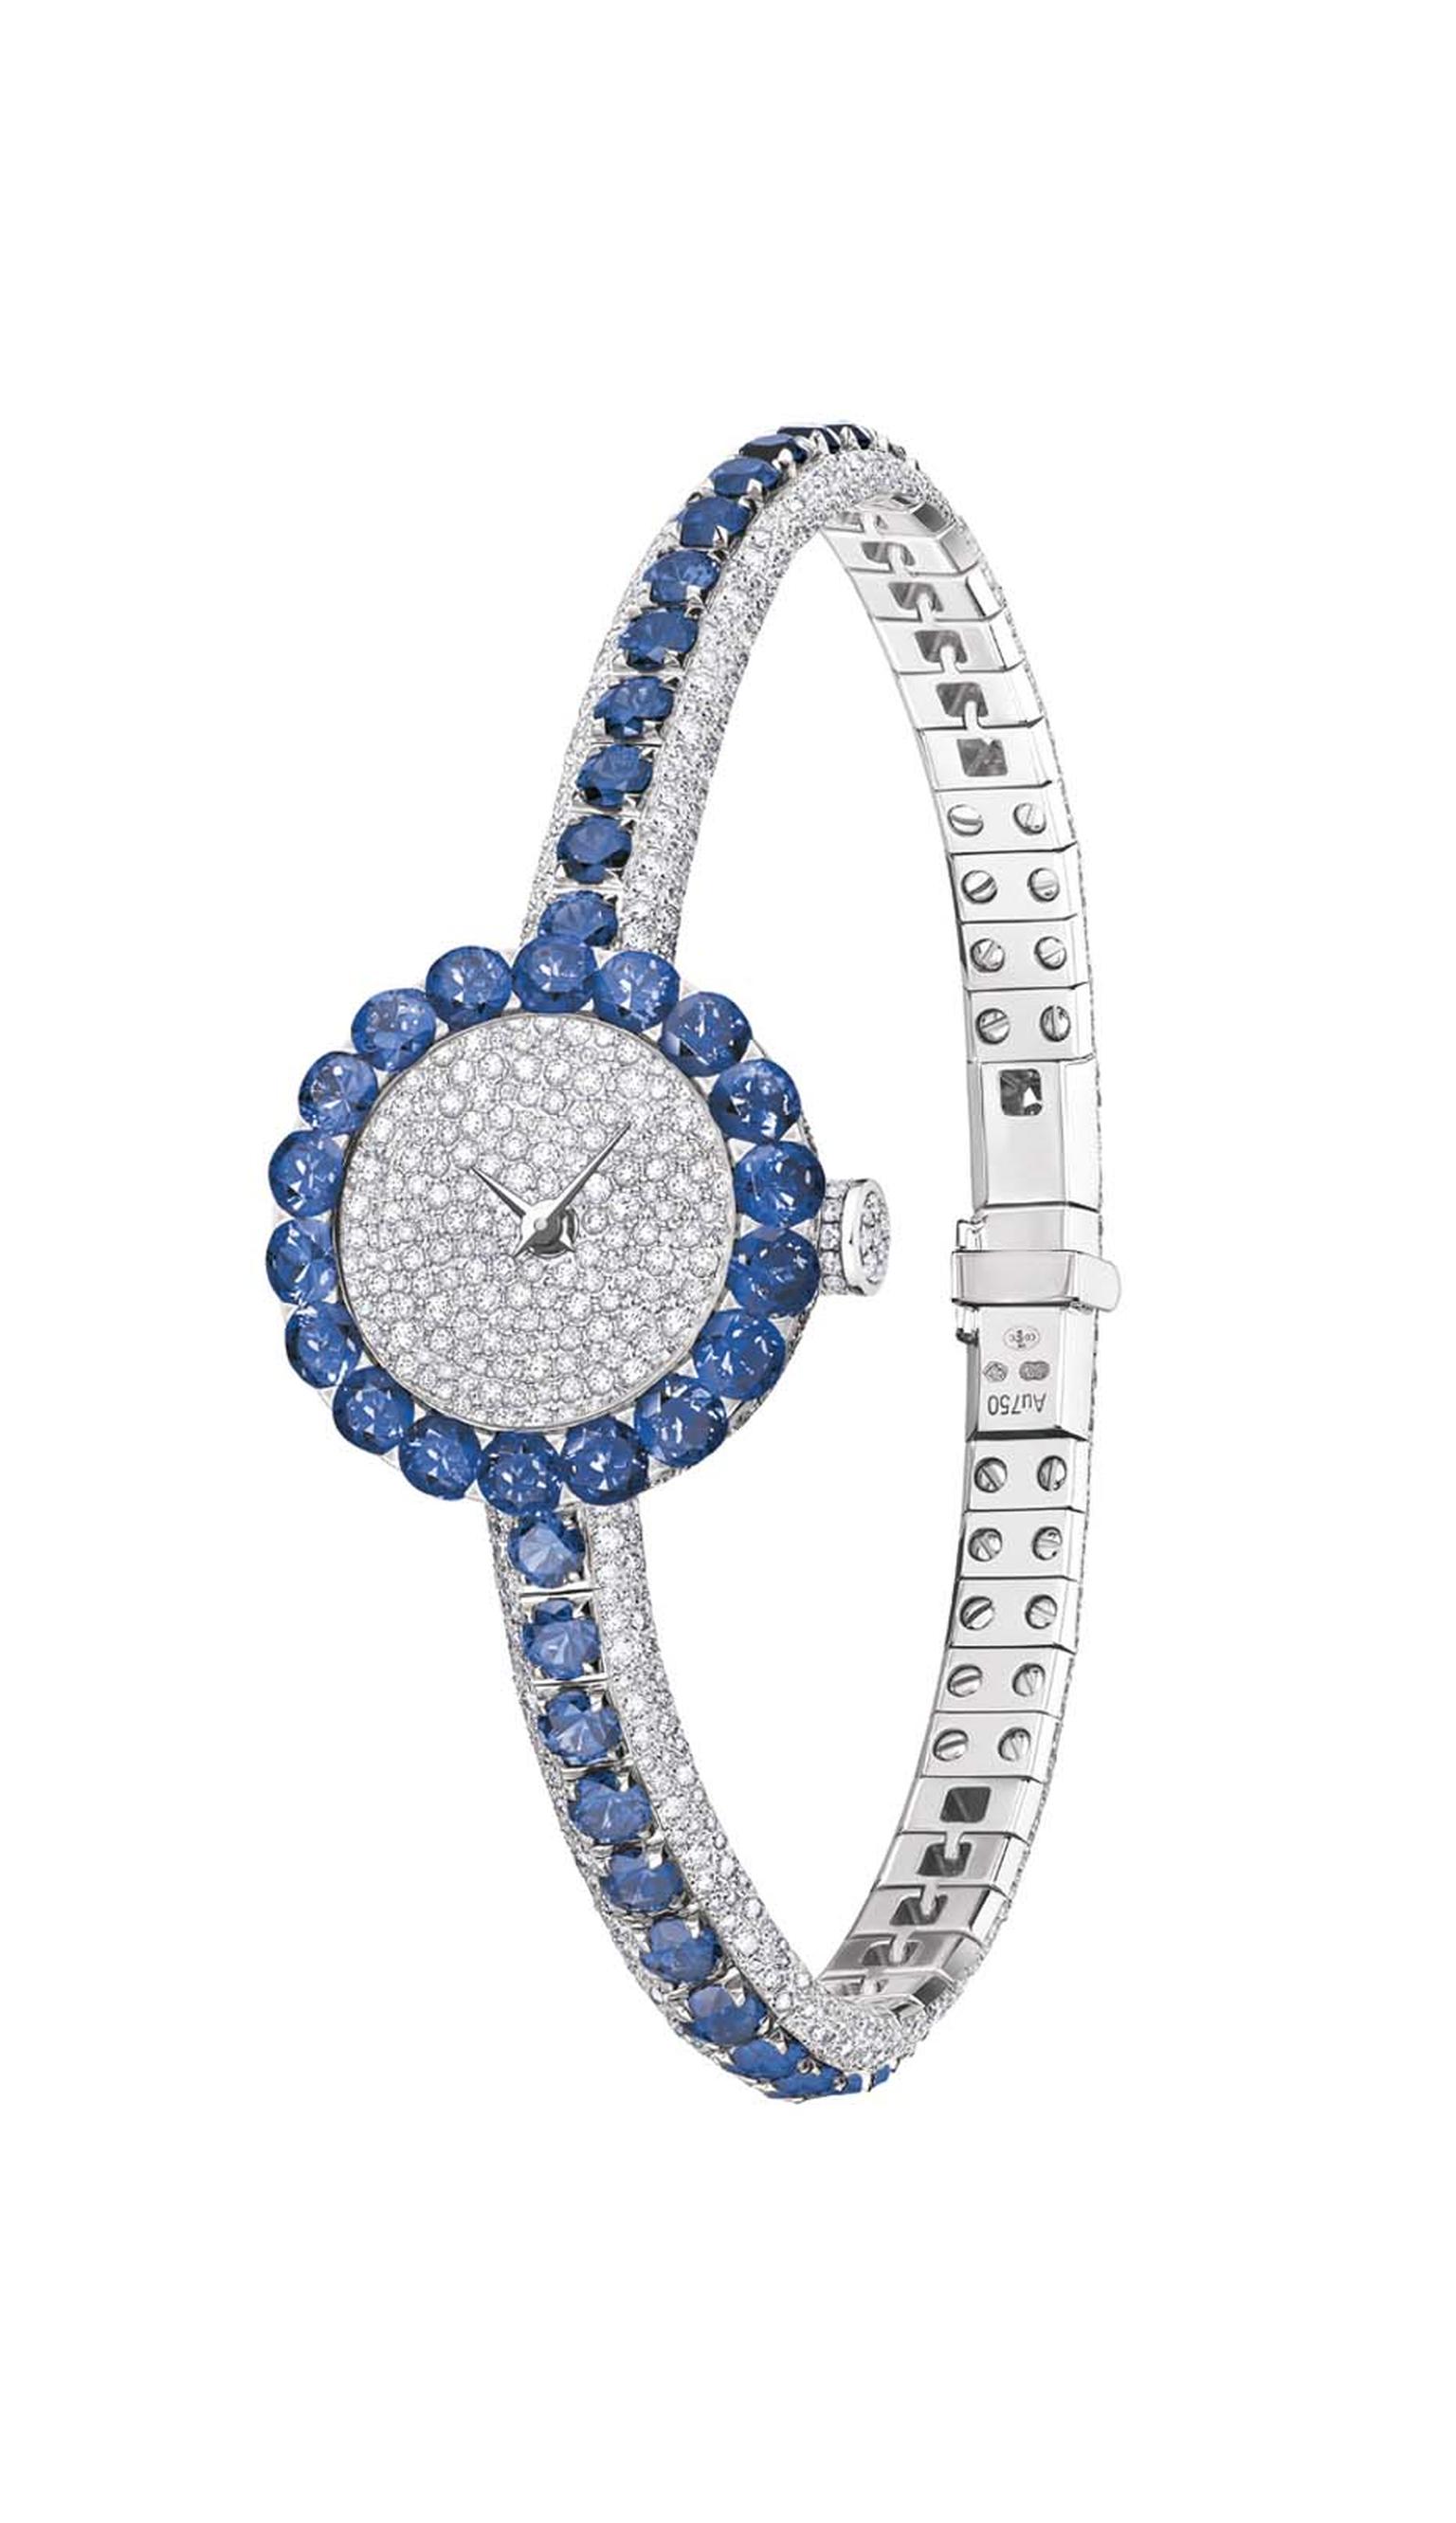 The Dior La D de Dior Précieuse high jewellery watch has a fantastic retro appeal and is the kind of watch you can imagine Grace Kelly slipping on with her Dior evening gown.